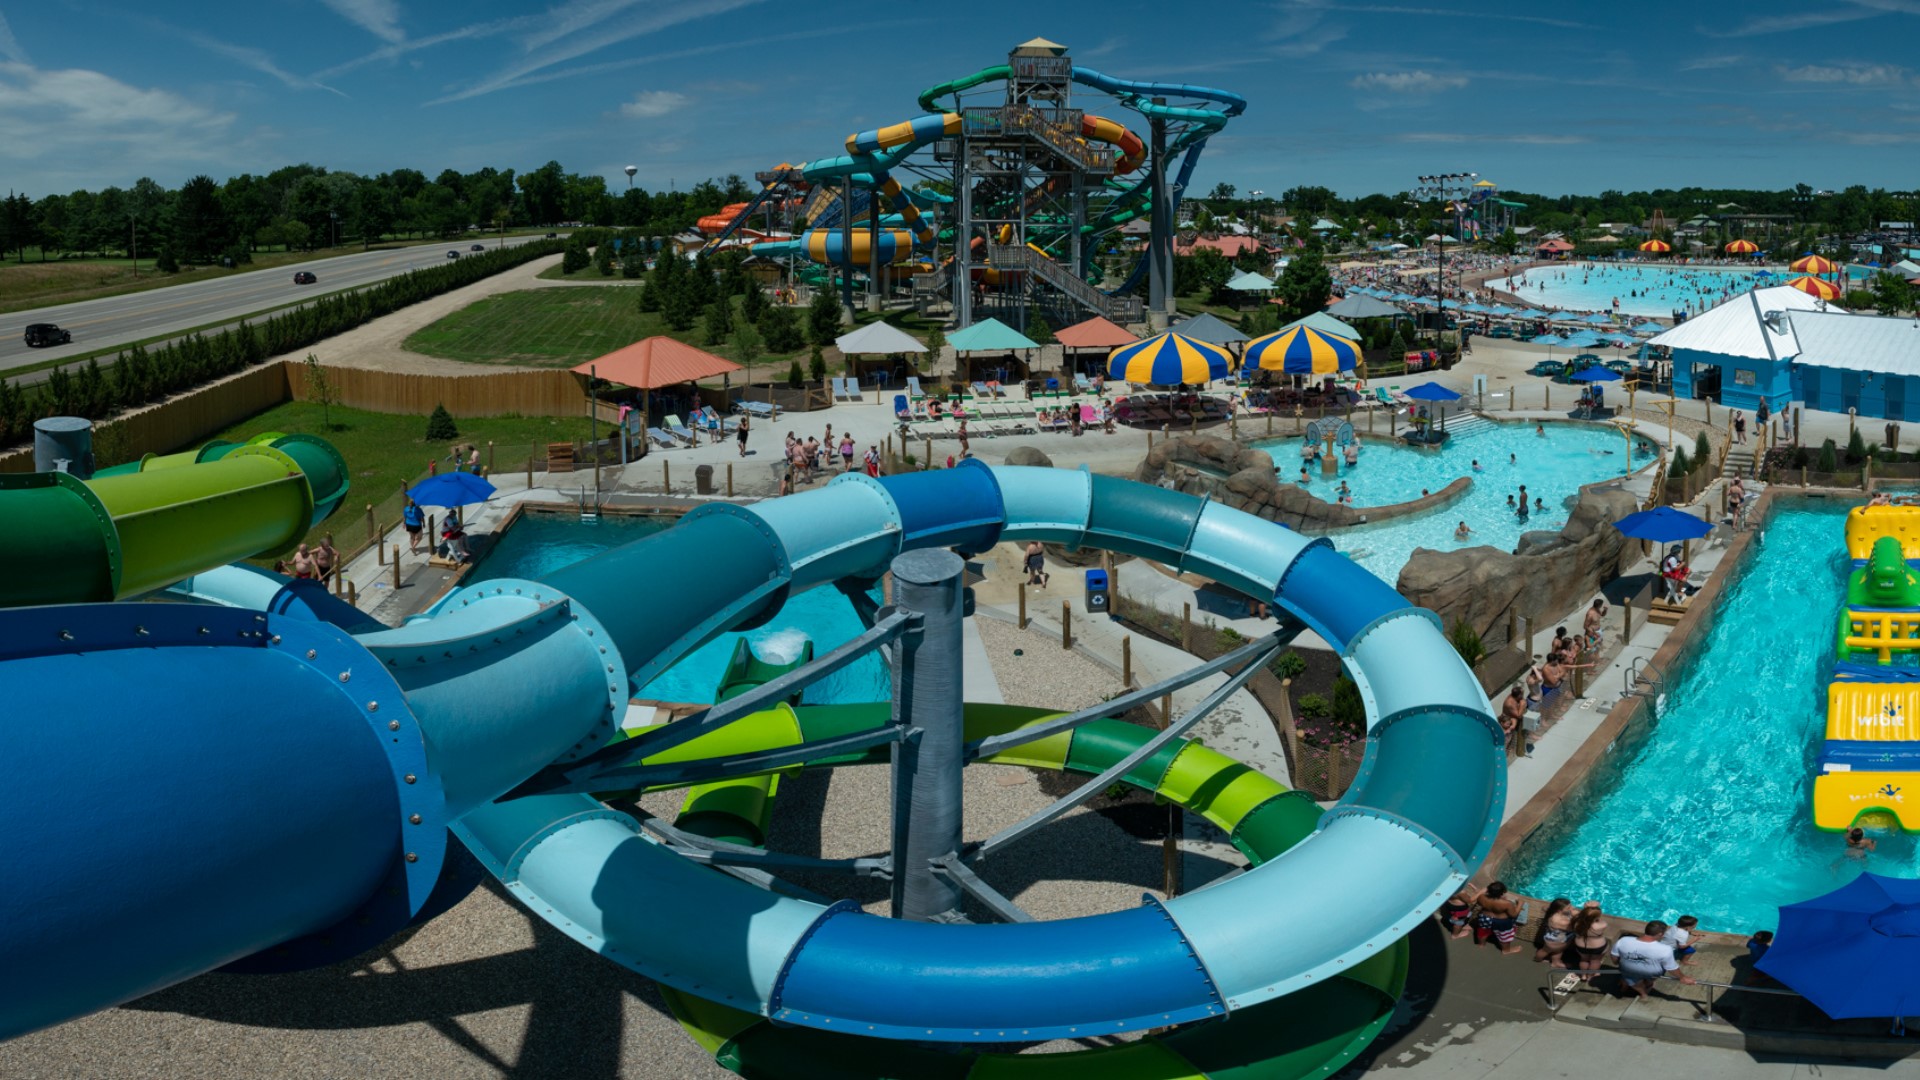 The waterpark will be open for all guests and season pass holders from 10:30 a.m. to 6 p.m. on Saturday and Sunday.